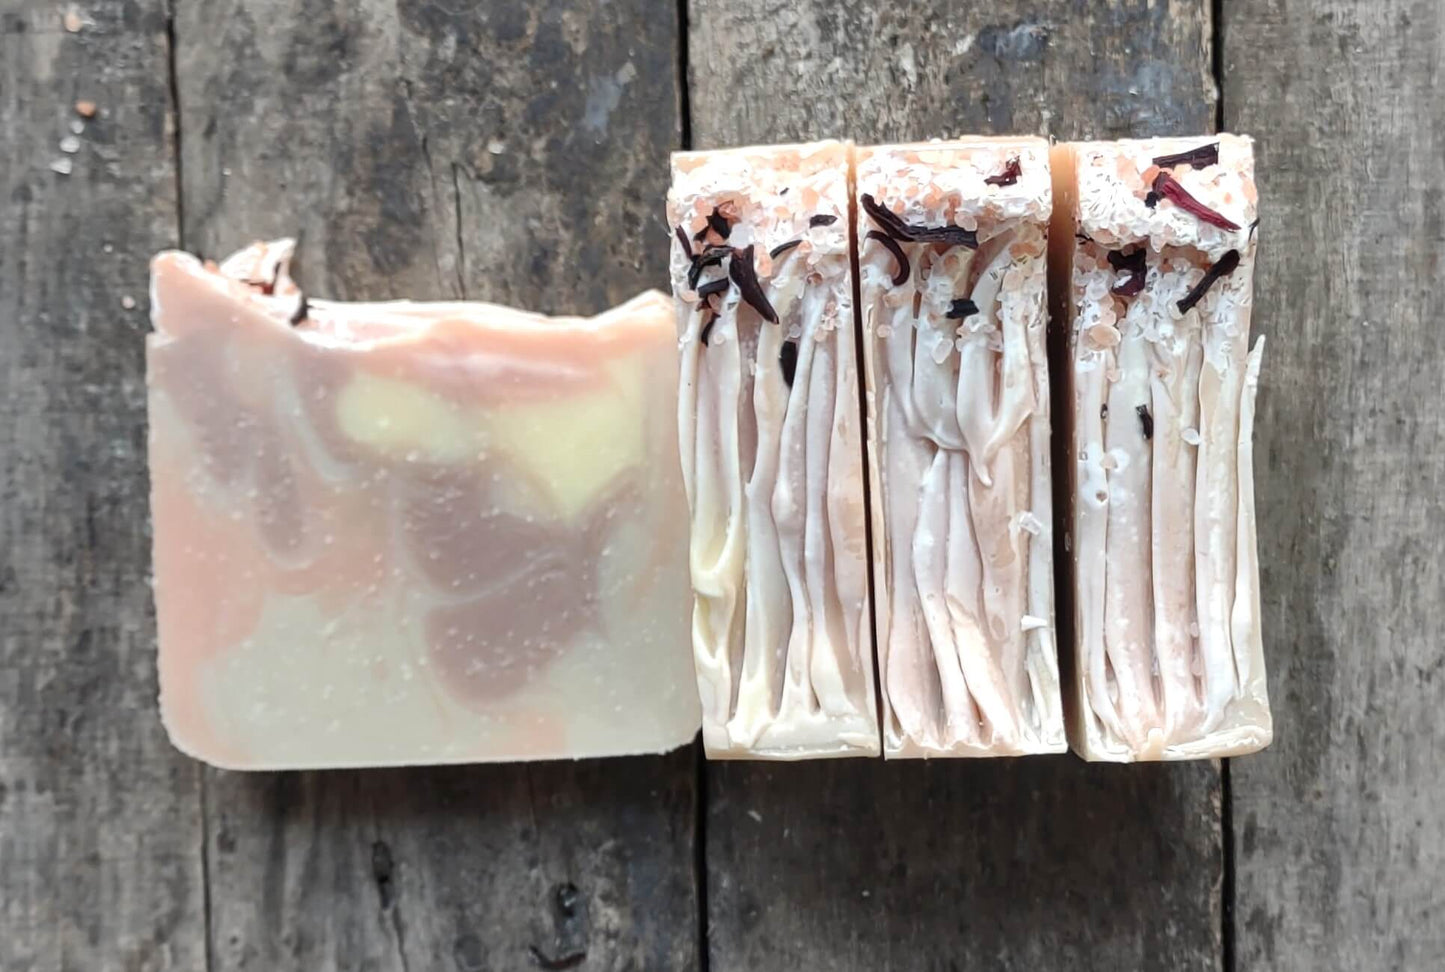 Soap Making Class at MonksGate - Sunday May 12th